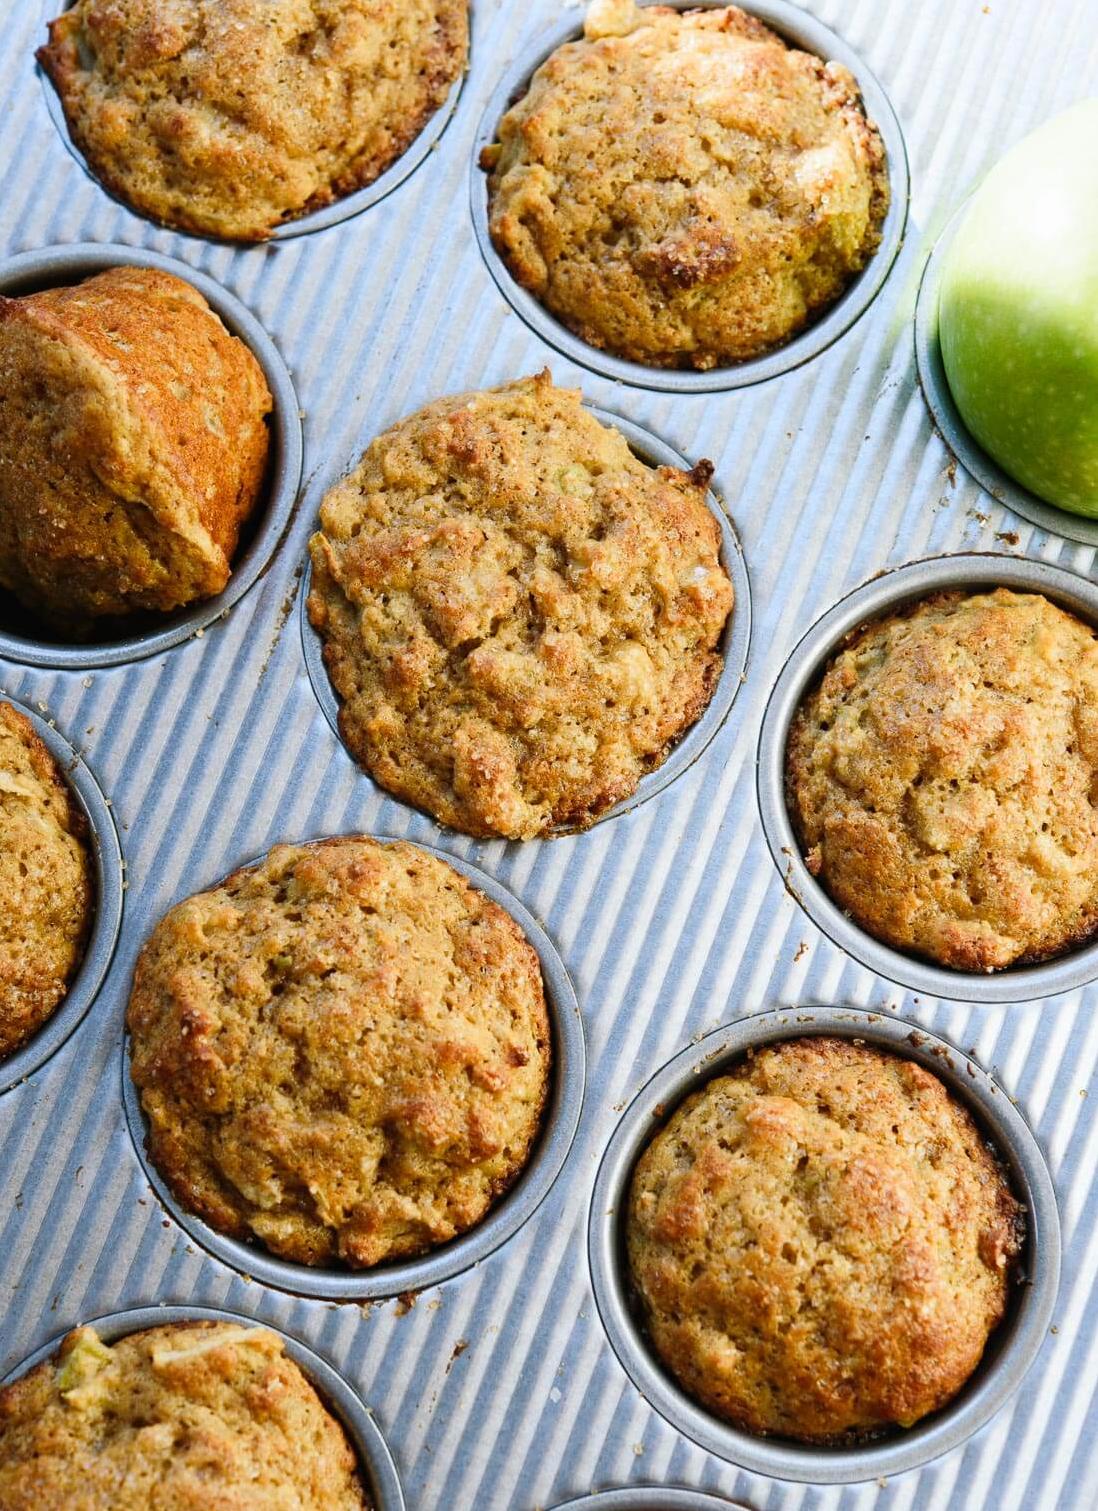  Soft and tender, these muffins will melt in your mouth.